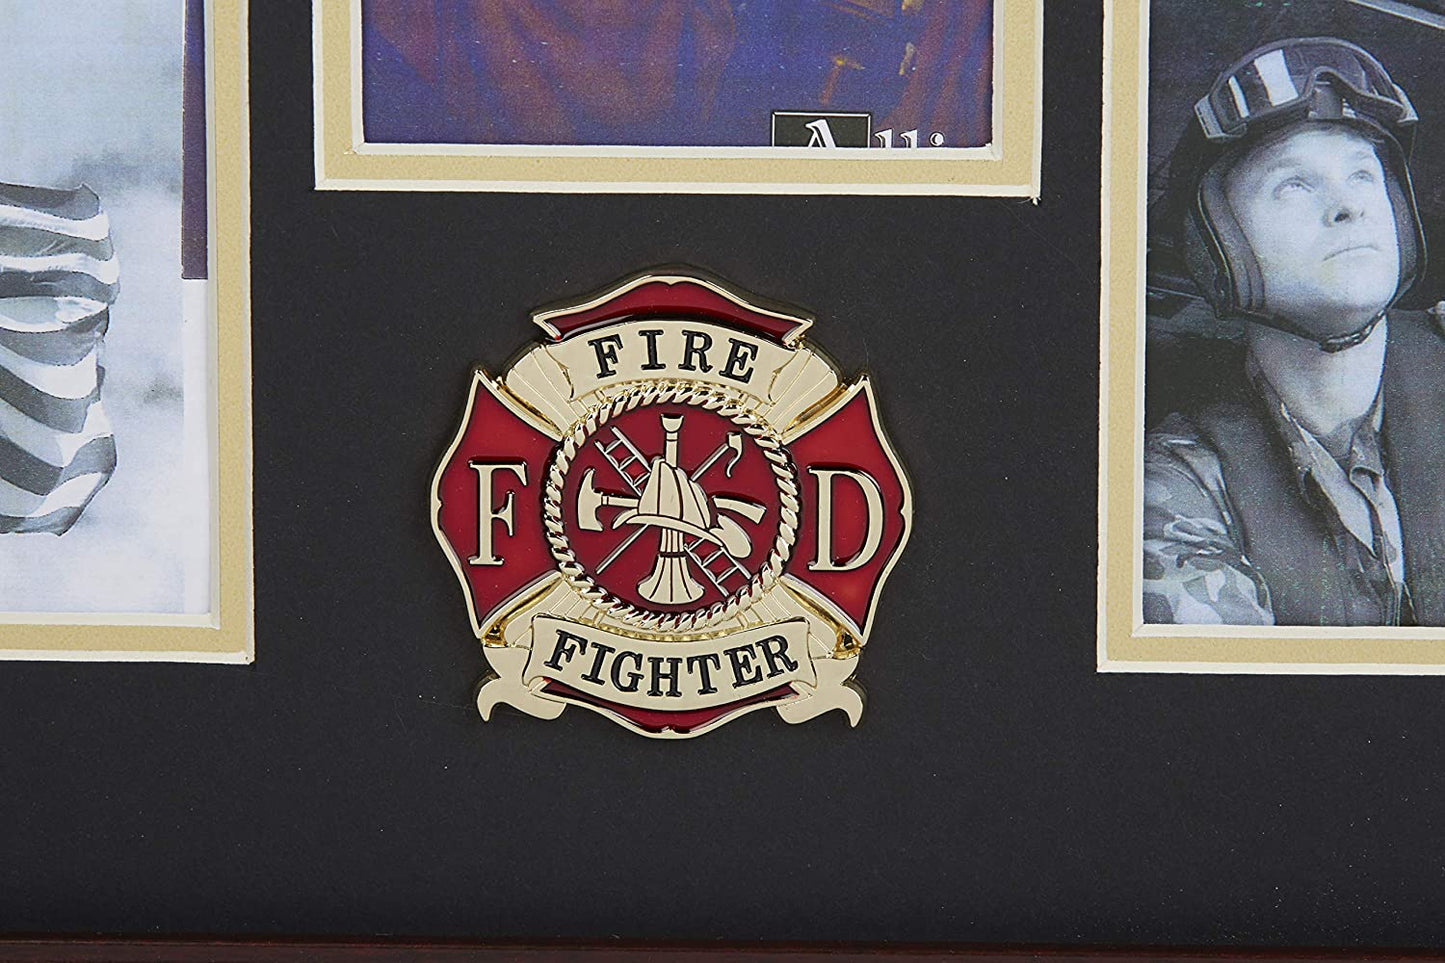 The Military Gift Store Products Frame Firefighter Medallion 5-Picture Collage Frame. by The Military Gift Store